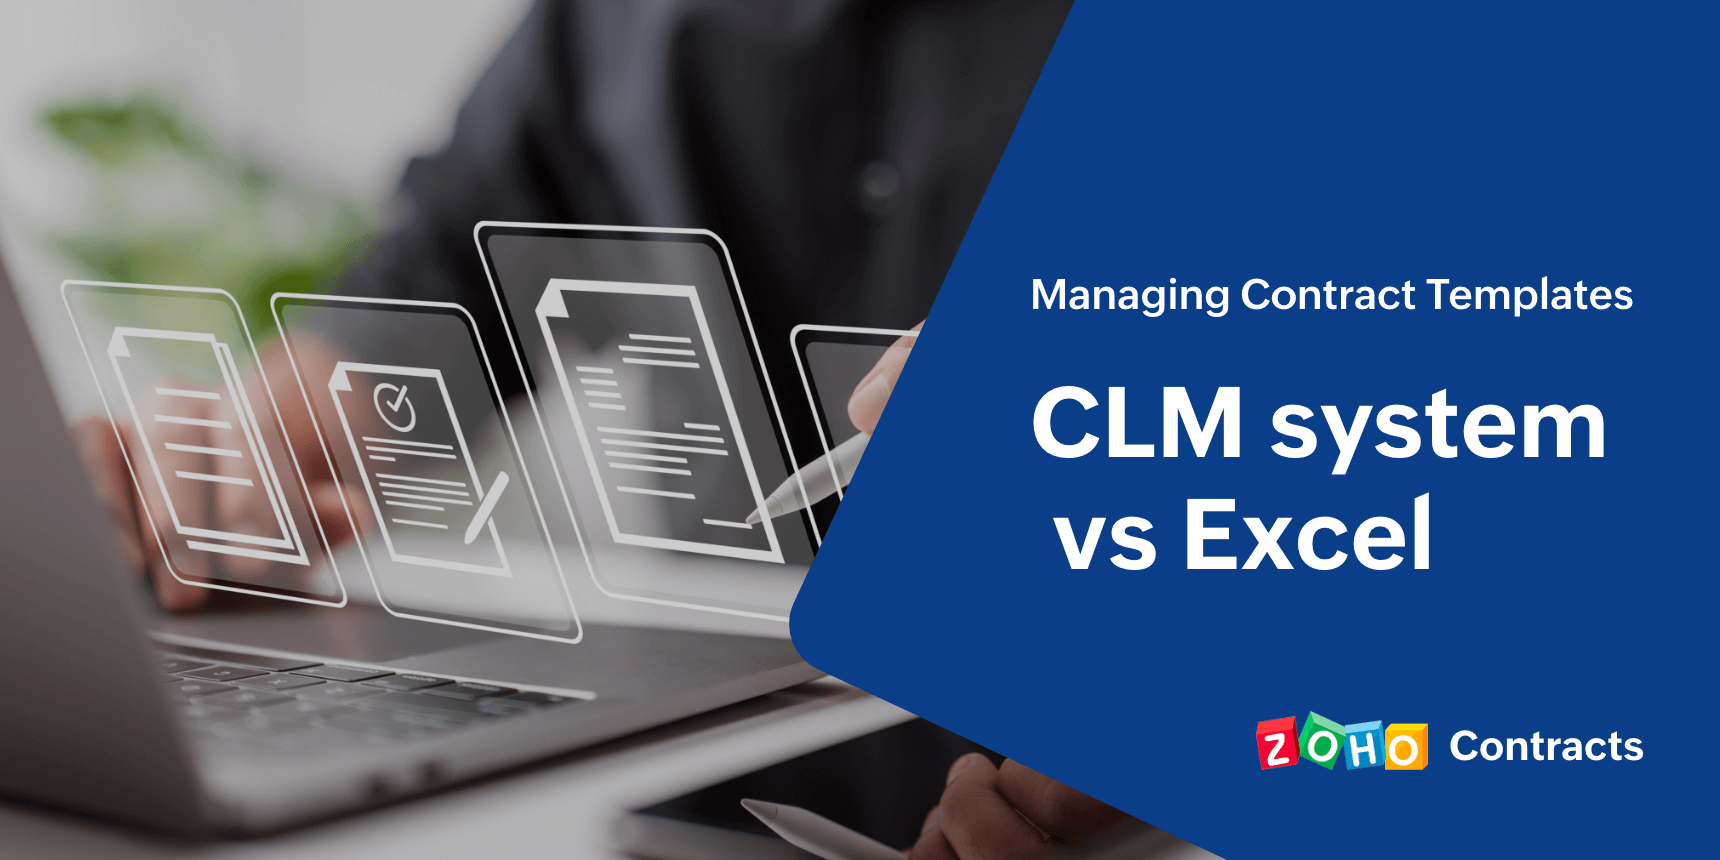 Managing contract templates in a CLM system vs Excel